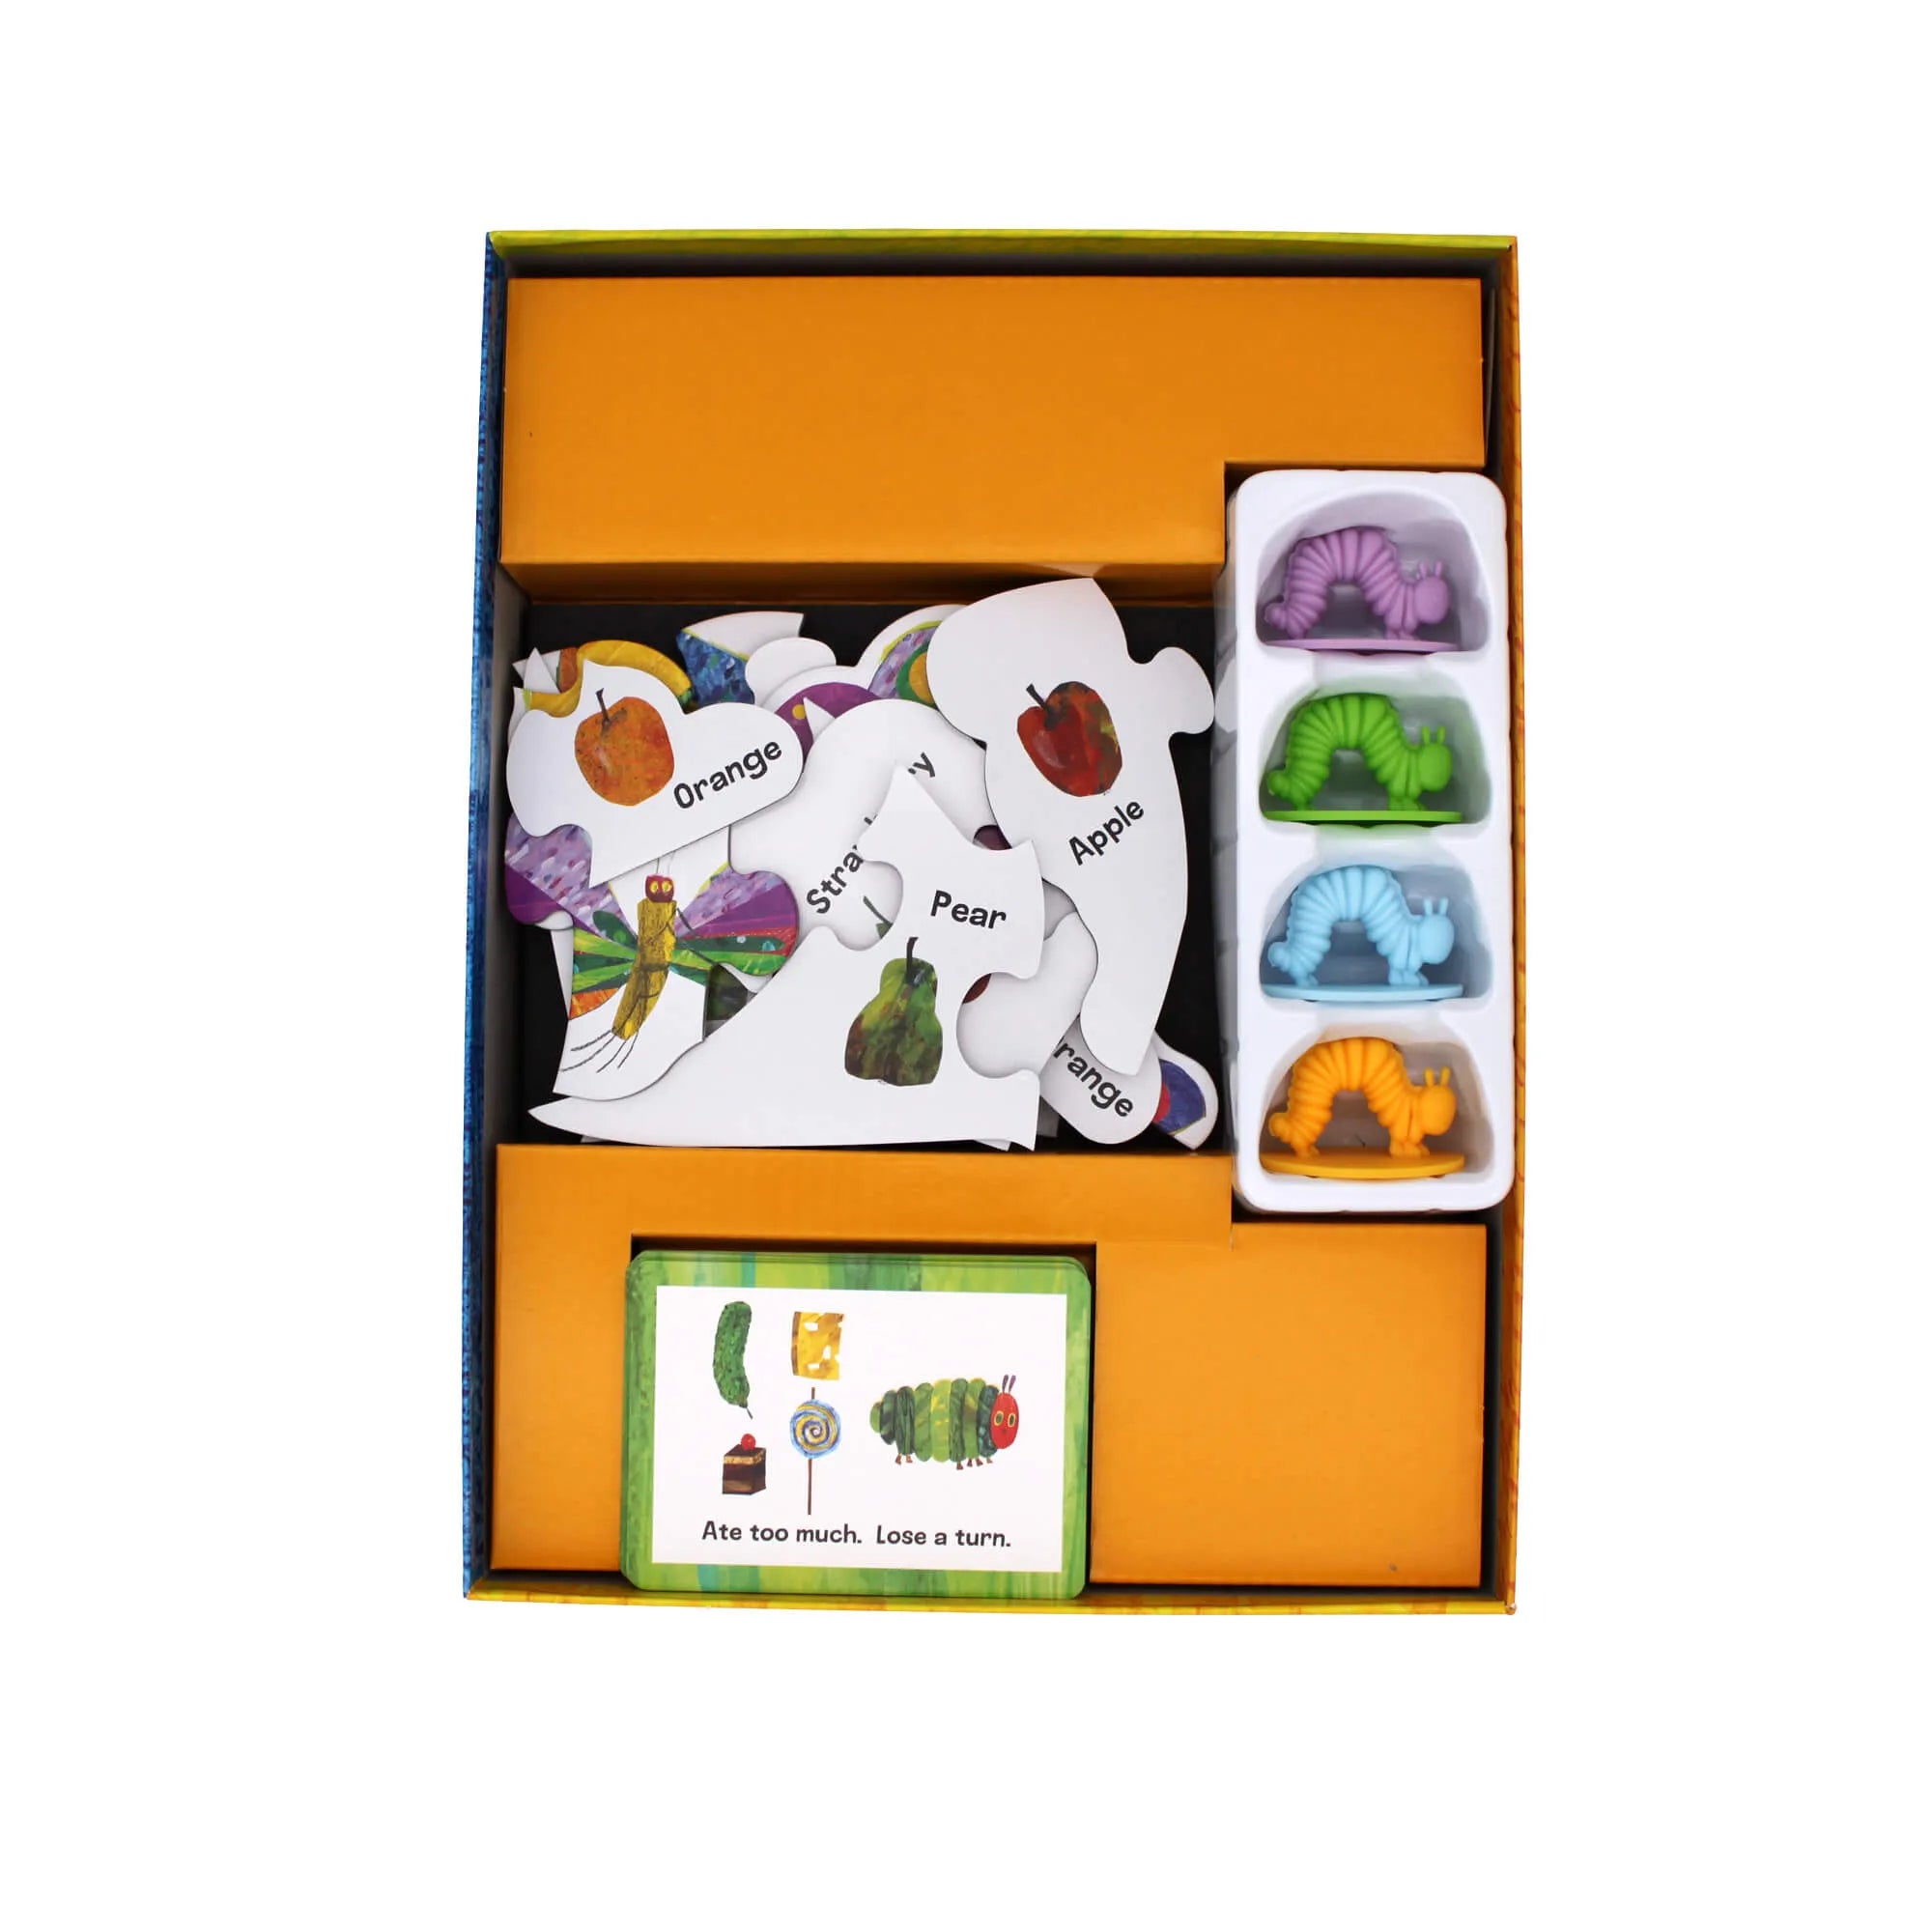 creative games for early childhood learning - the hungry caterpillar board game - shop at the toy room